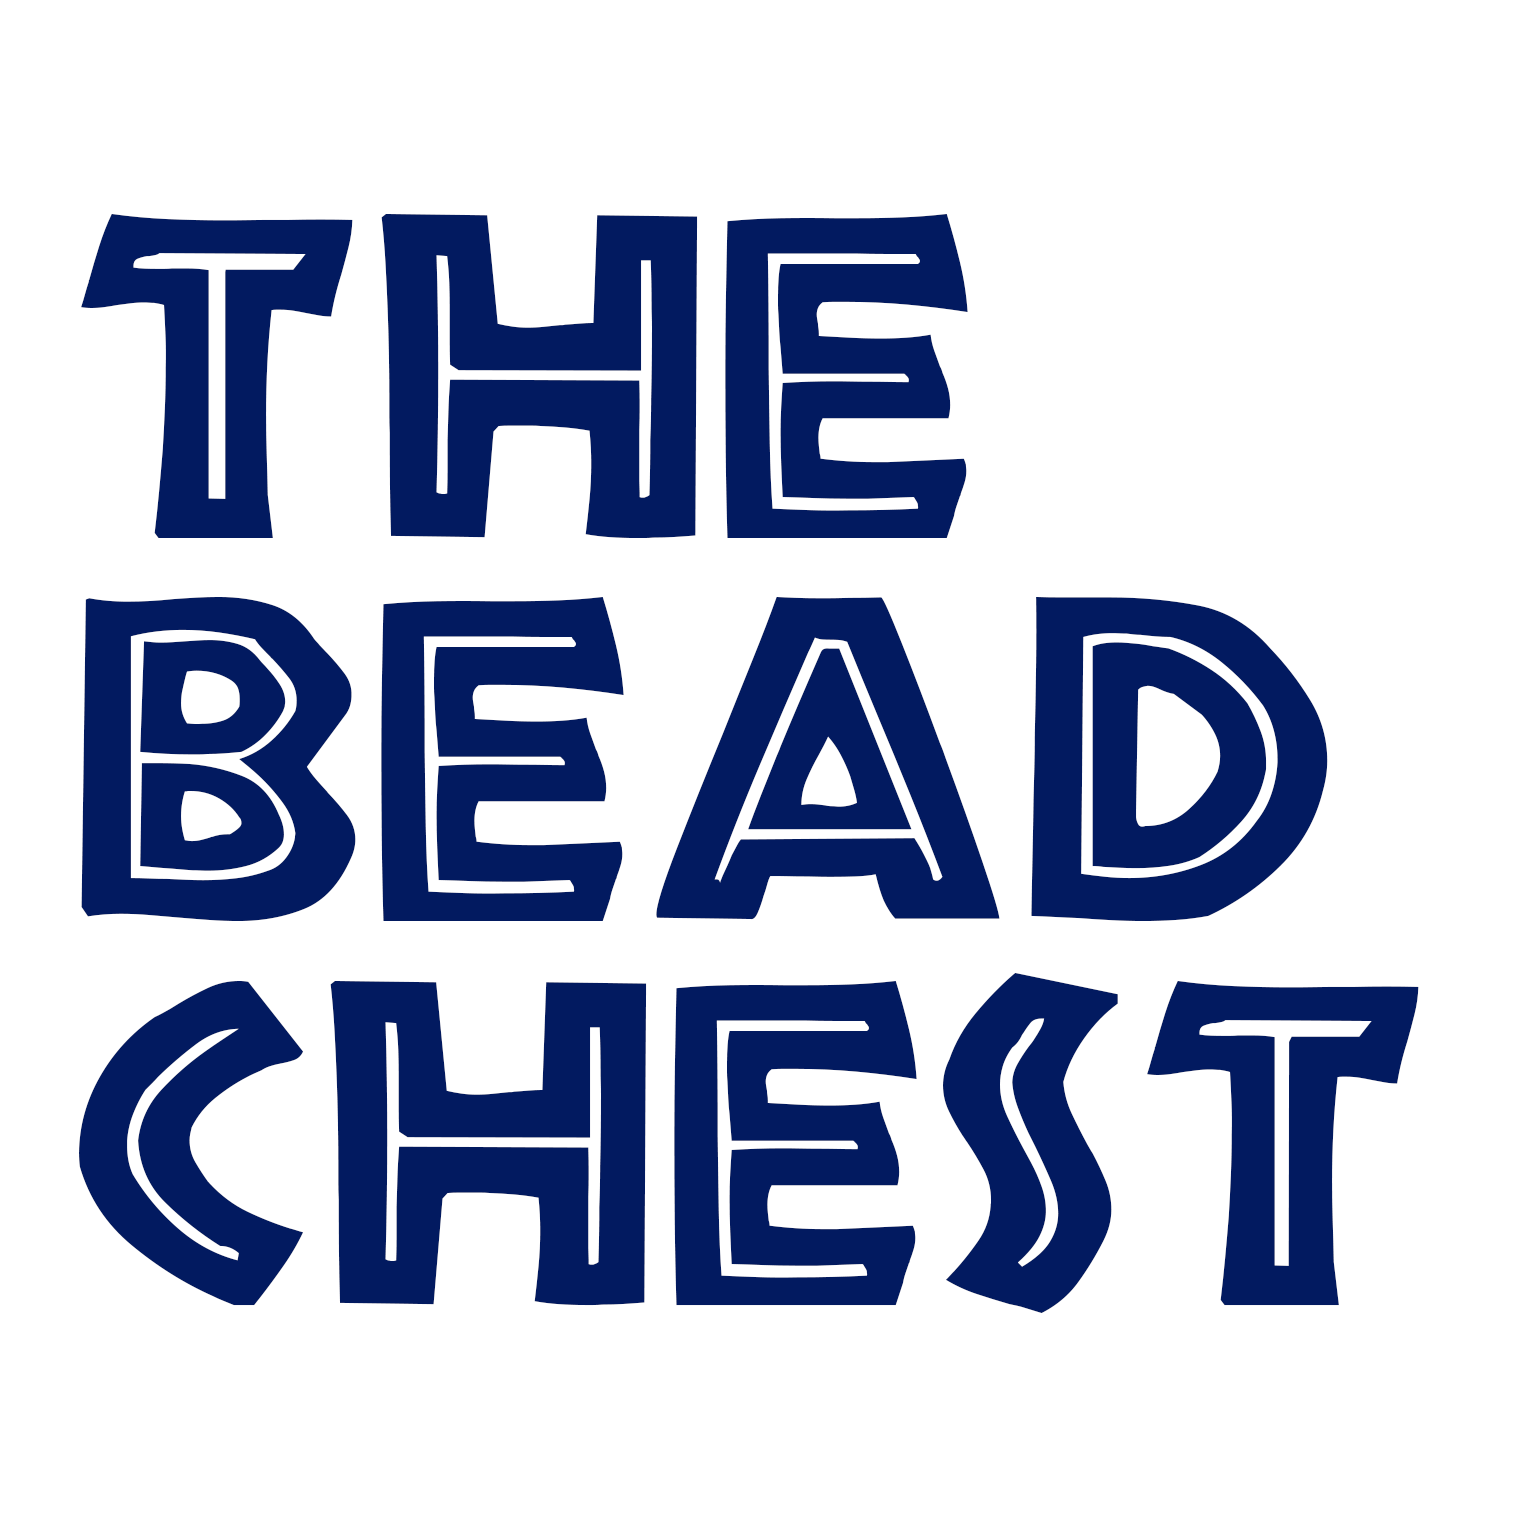 The Bead Chest wholesale products